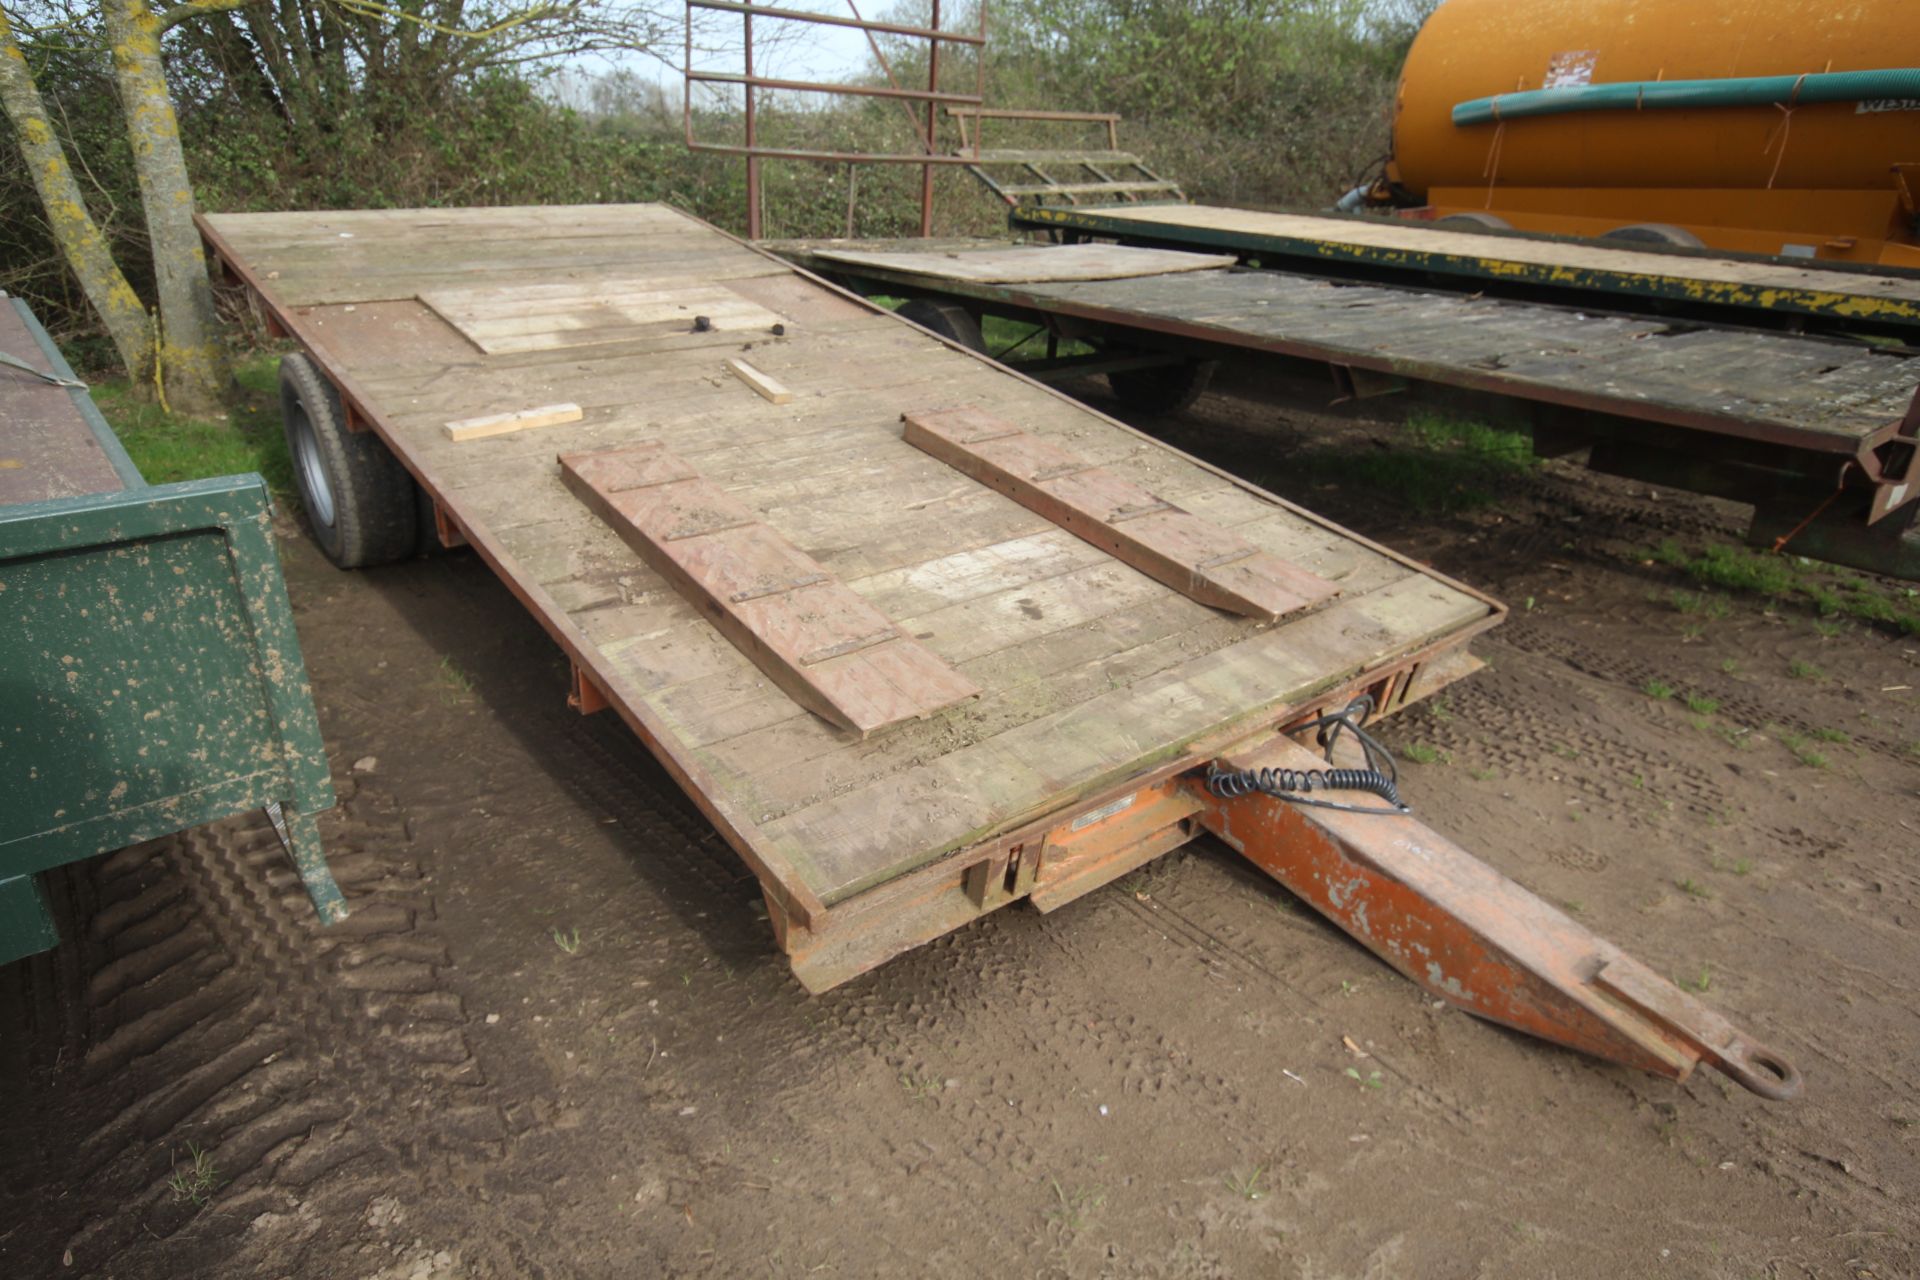 Brian Legg 8T single axle low loader. With lights, hydraulic brakes and ramps. - Bild 2 aus 15